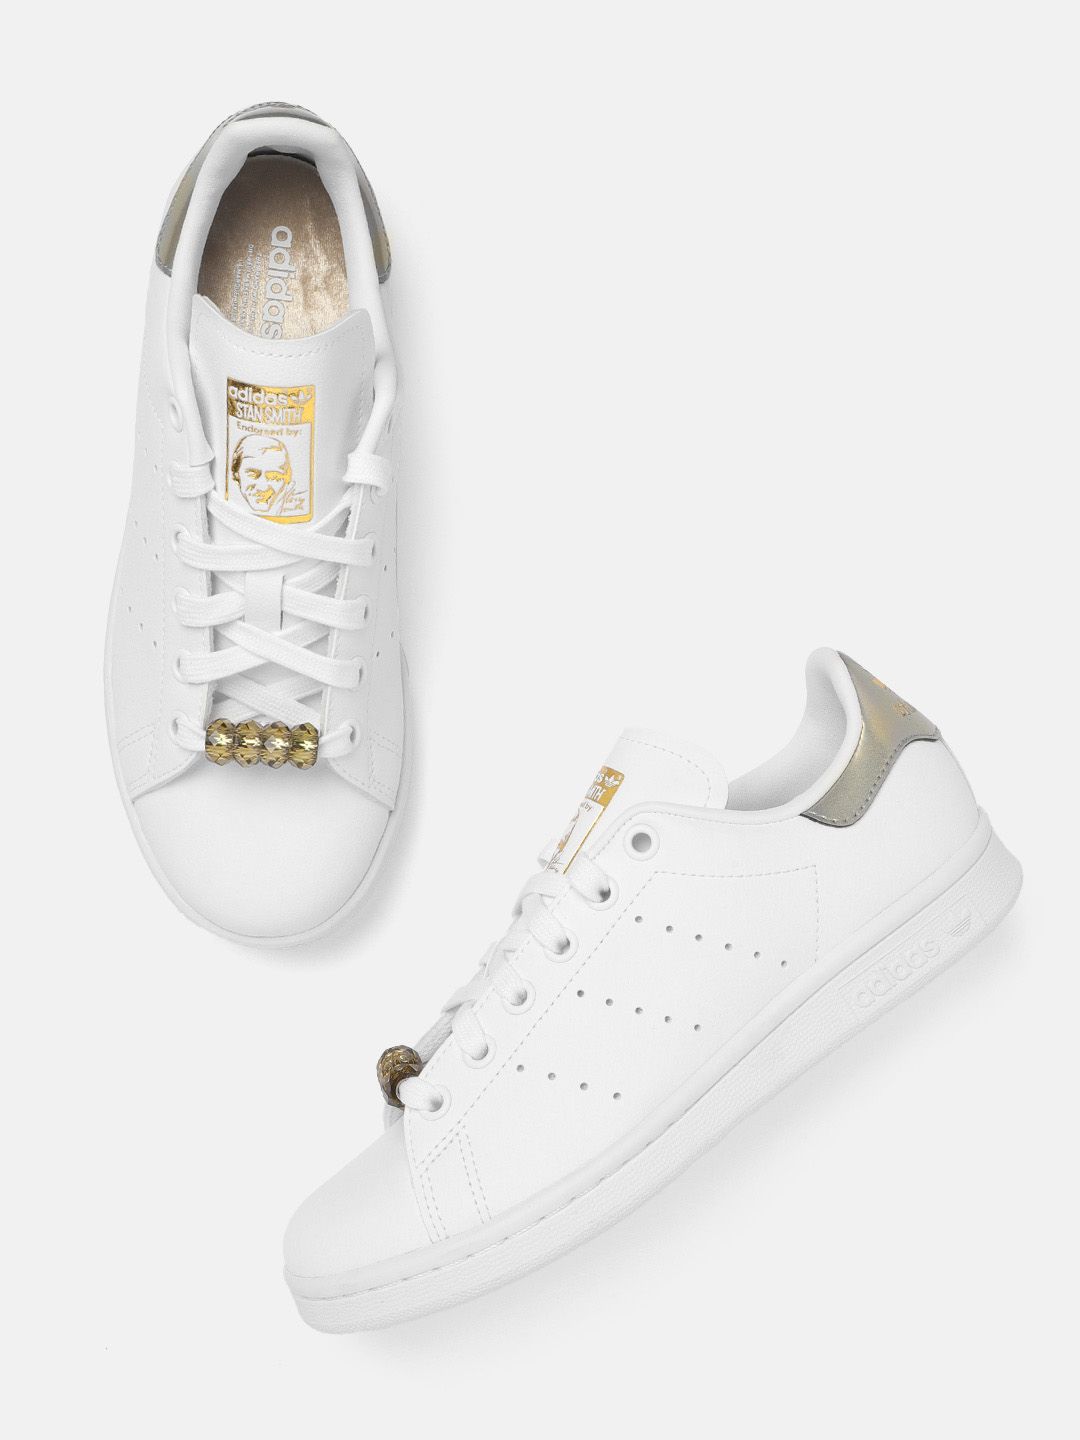 ADIDAS Originals Women White Sneakers Beads Embellished Perforated Stan Smith Sneakers Price in India